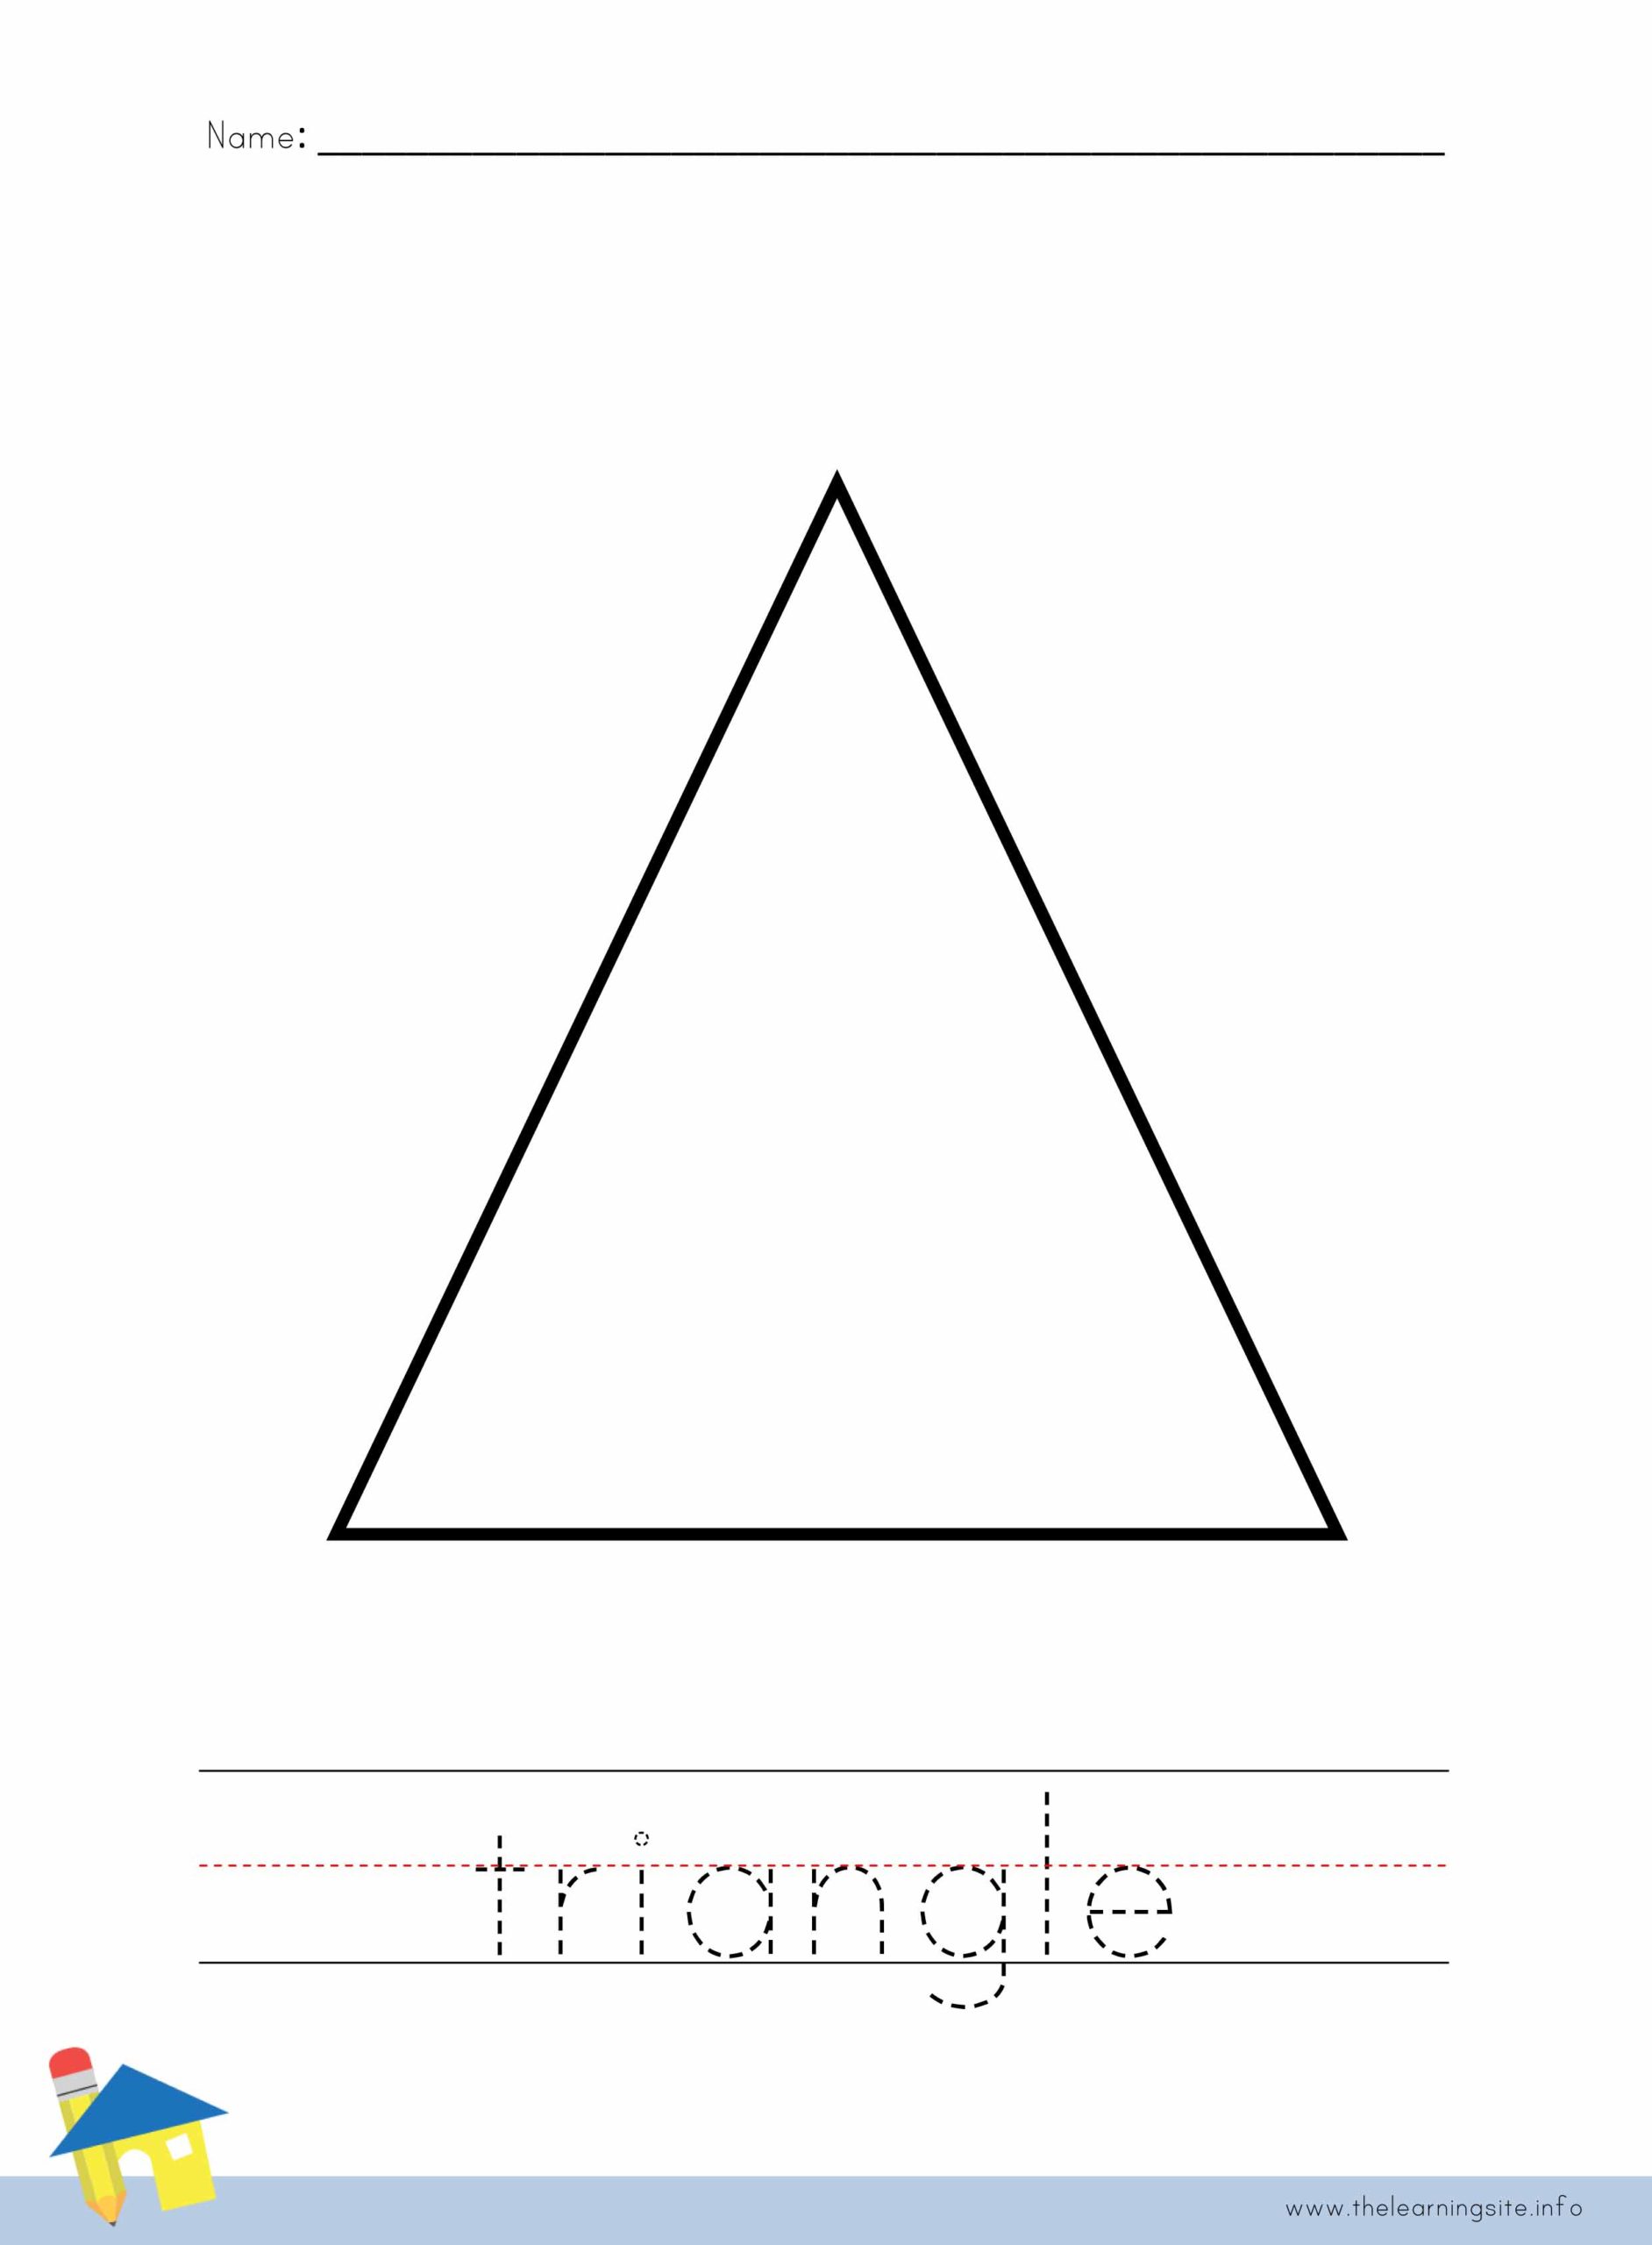 triangle-coloring-worksheet-the-learning-site